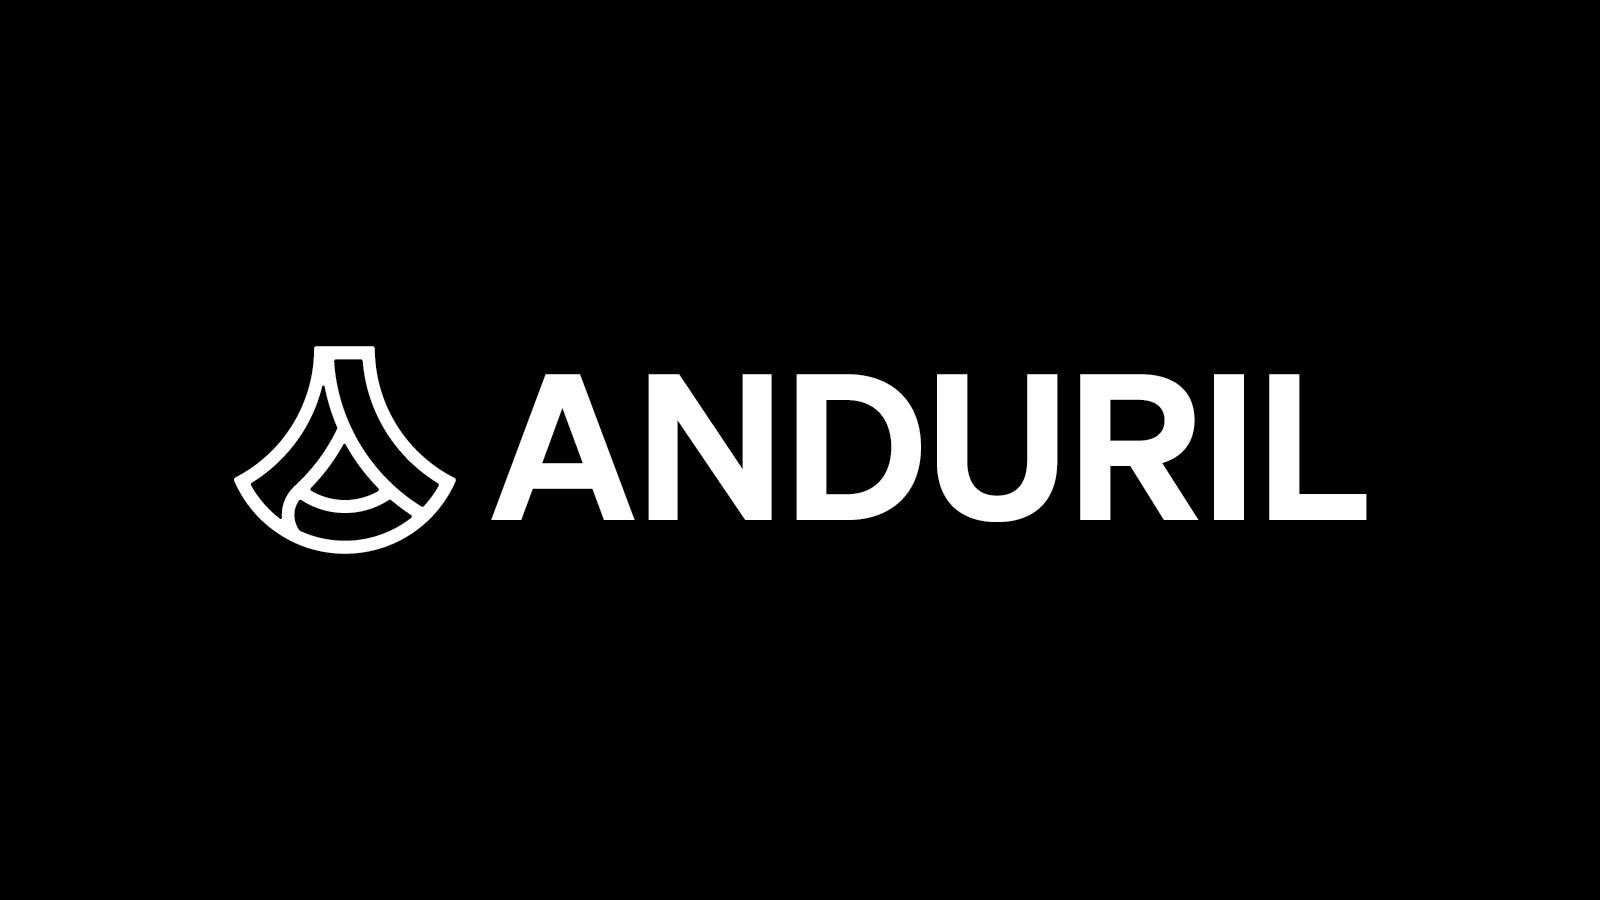 Army Selects Anduril and Palantir to Deliver TITAN Deep Sensing Capability for Long Range Fires